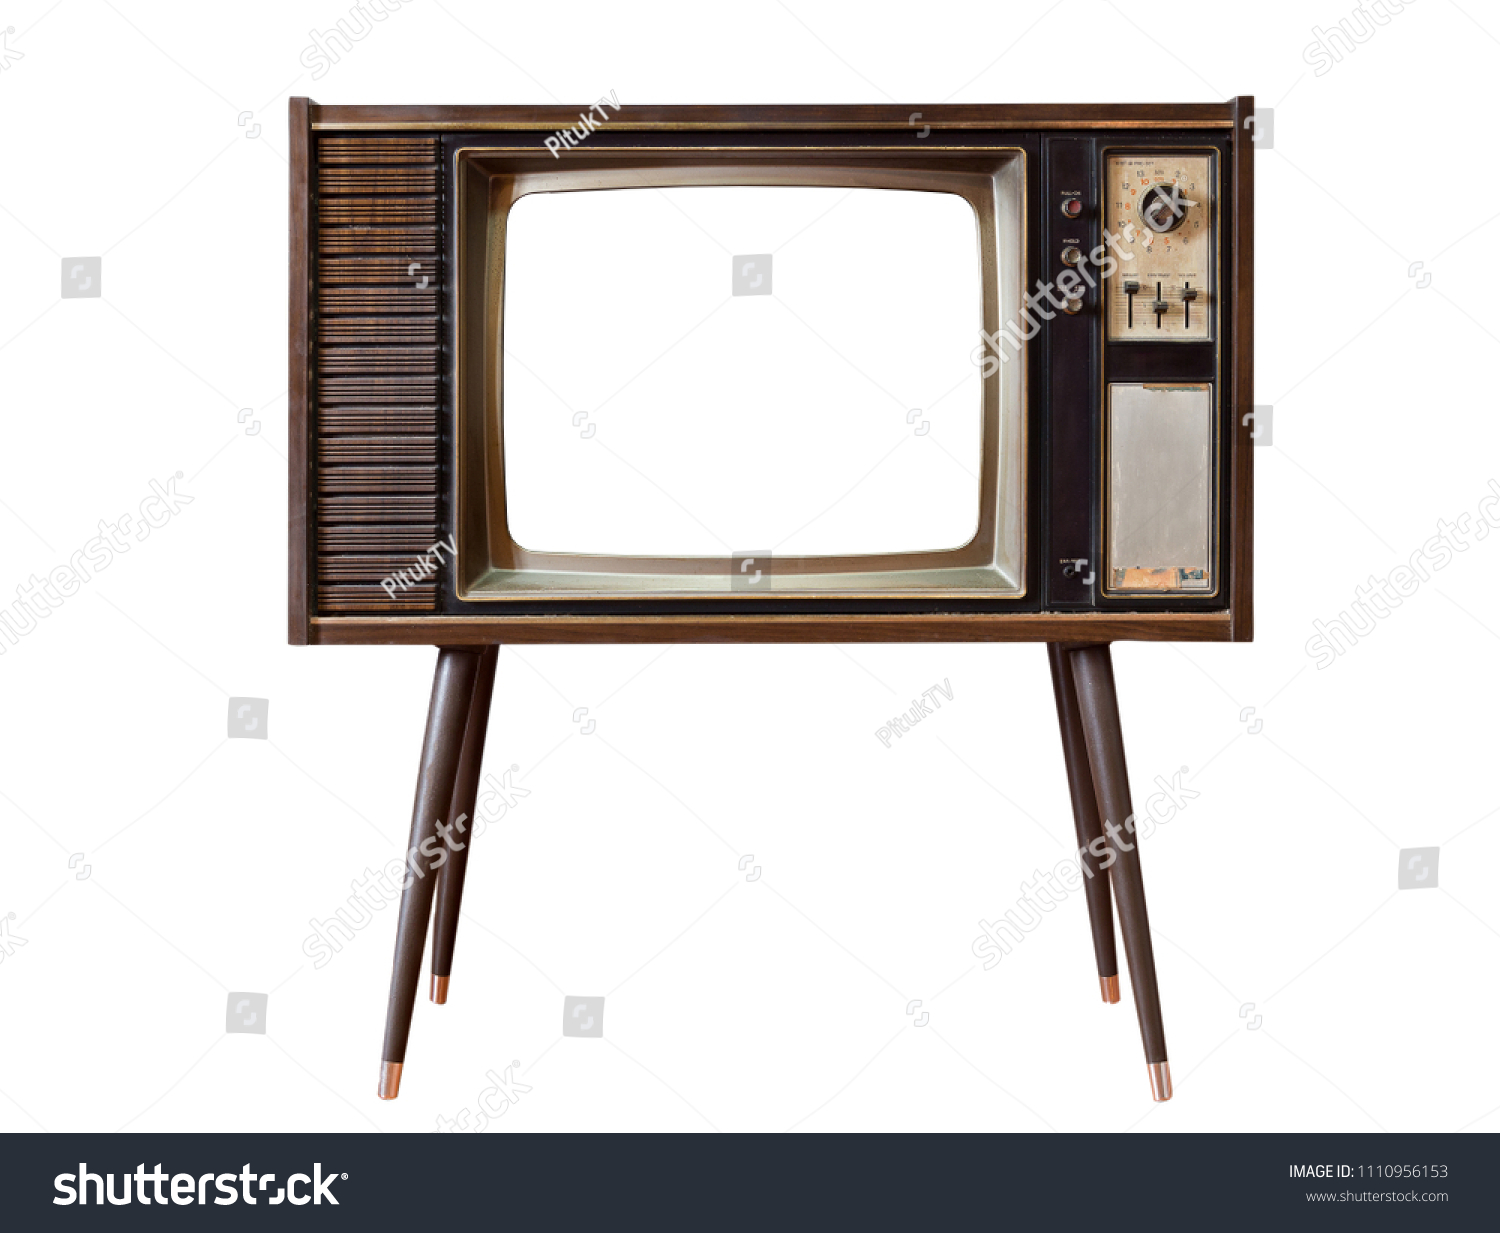 Vintage old TV standing and cut out screen with clipping path isolated on white background, Classic, retro old tv technology with wood case. #1110956153